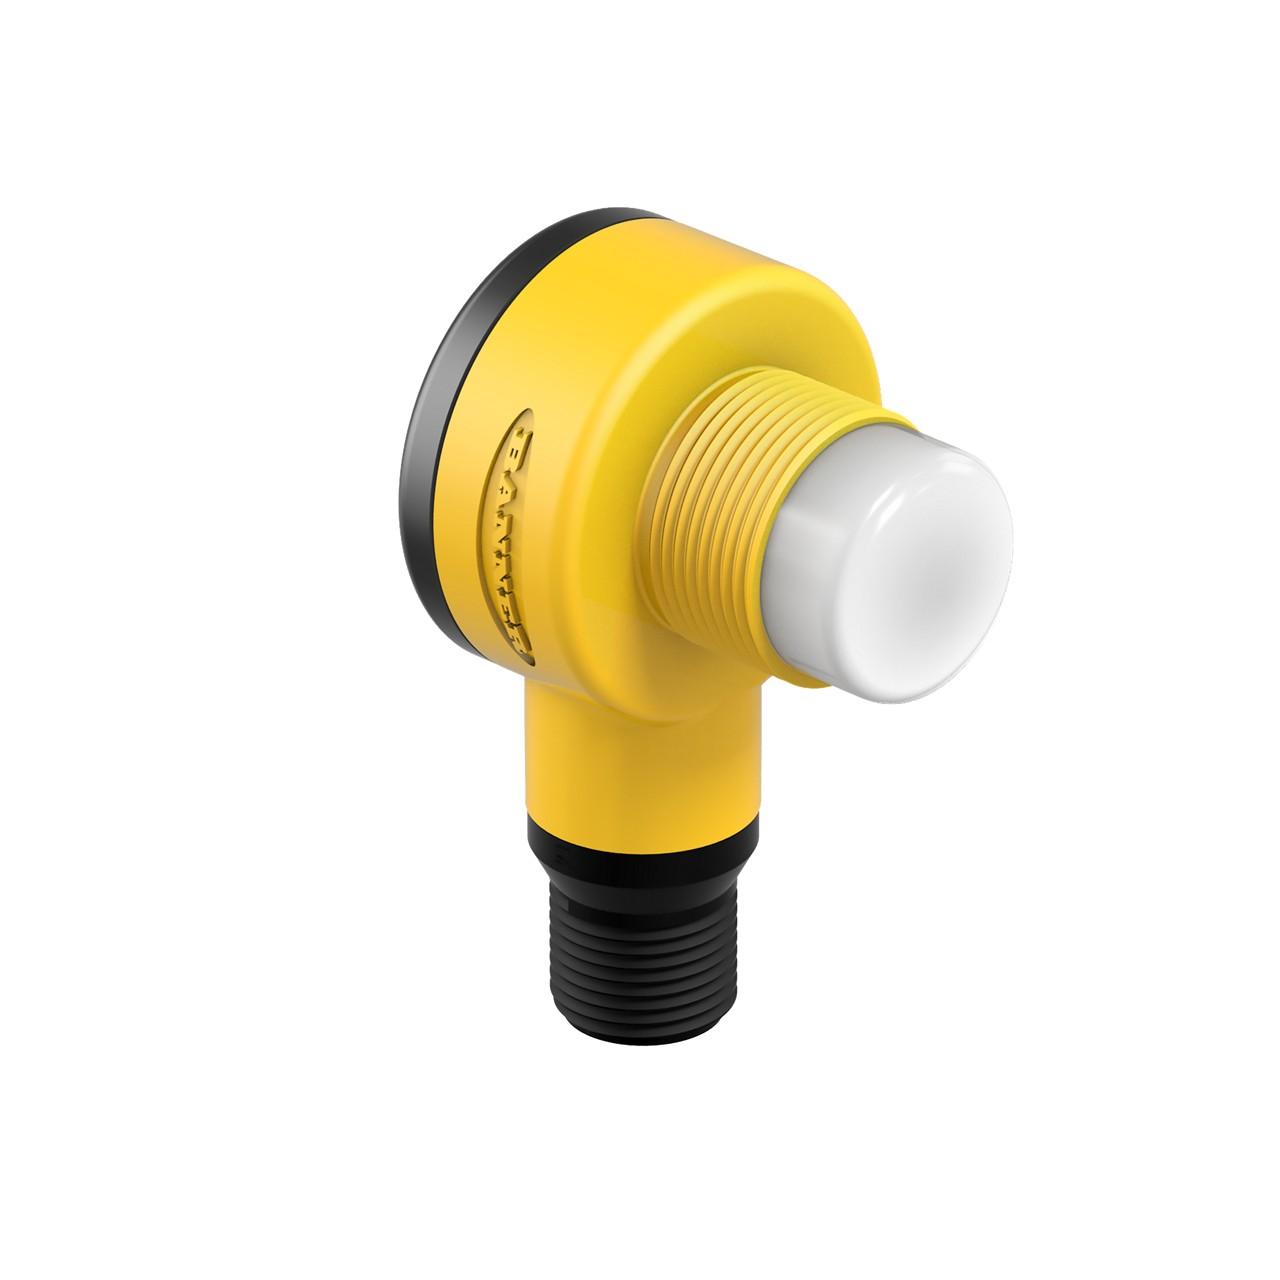 Banner T18XRYPQ T18 Series EZ-LIGHT: 2-Color General Purpose Indic, Voltage: 10-30V dc; Housing: Thermoplastic Poly; I, Input: PNP; Colors: Red   Yellow, Euro-style Quick-Disconnect Connector